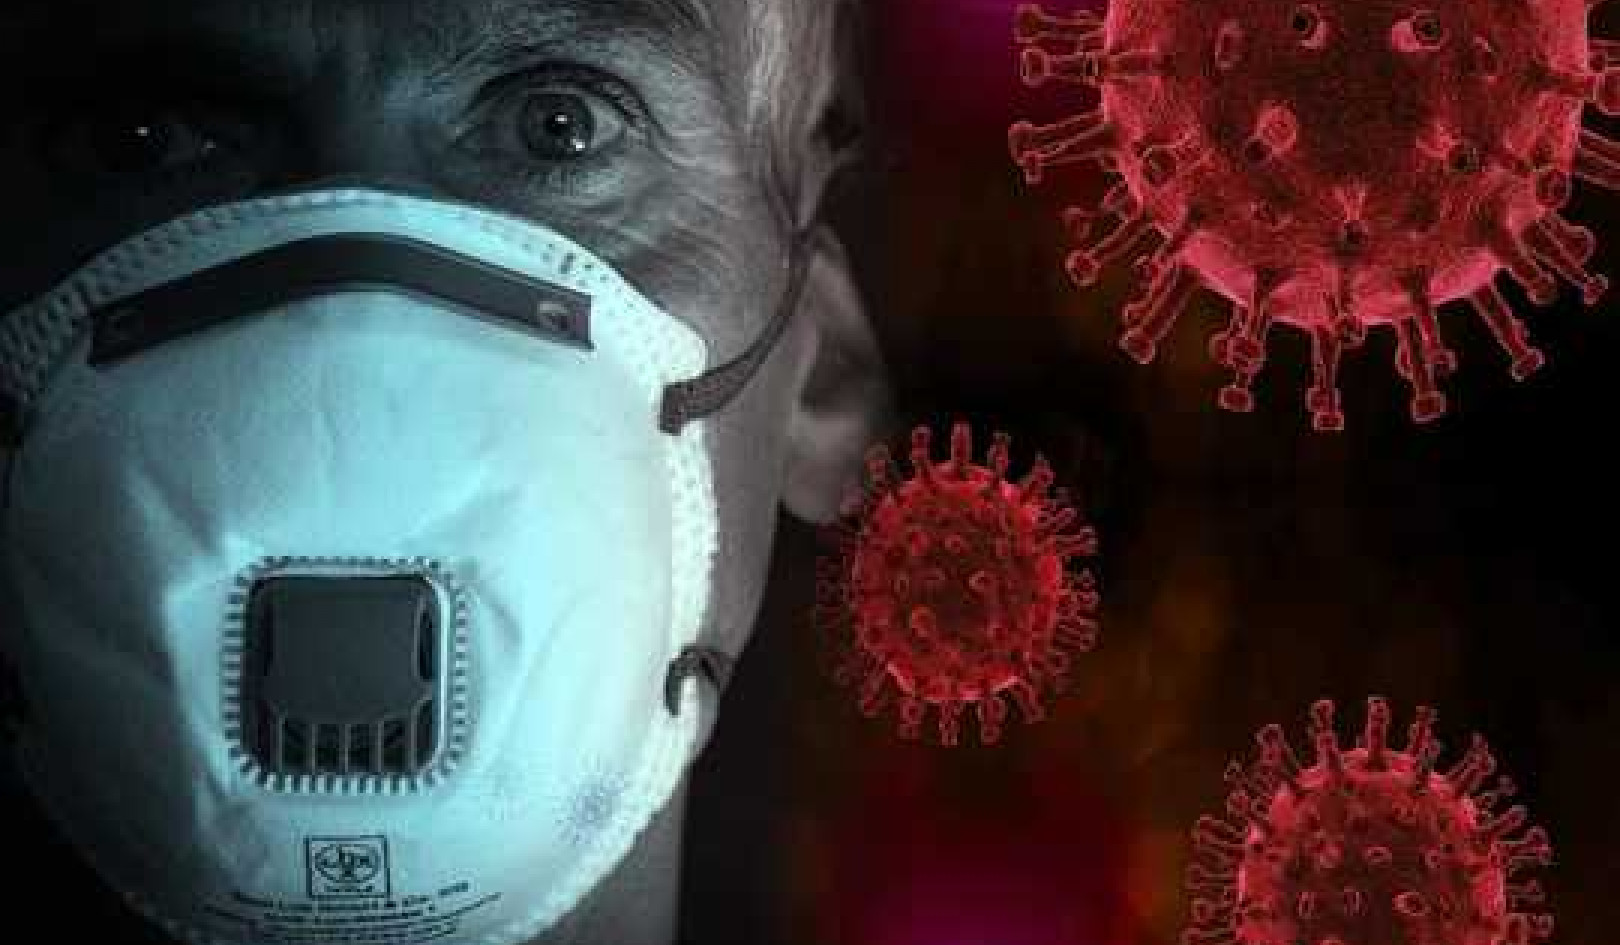 Could Reading About The Coronavirus Pandemic Cause Harm?